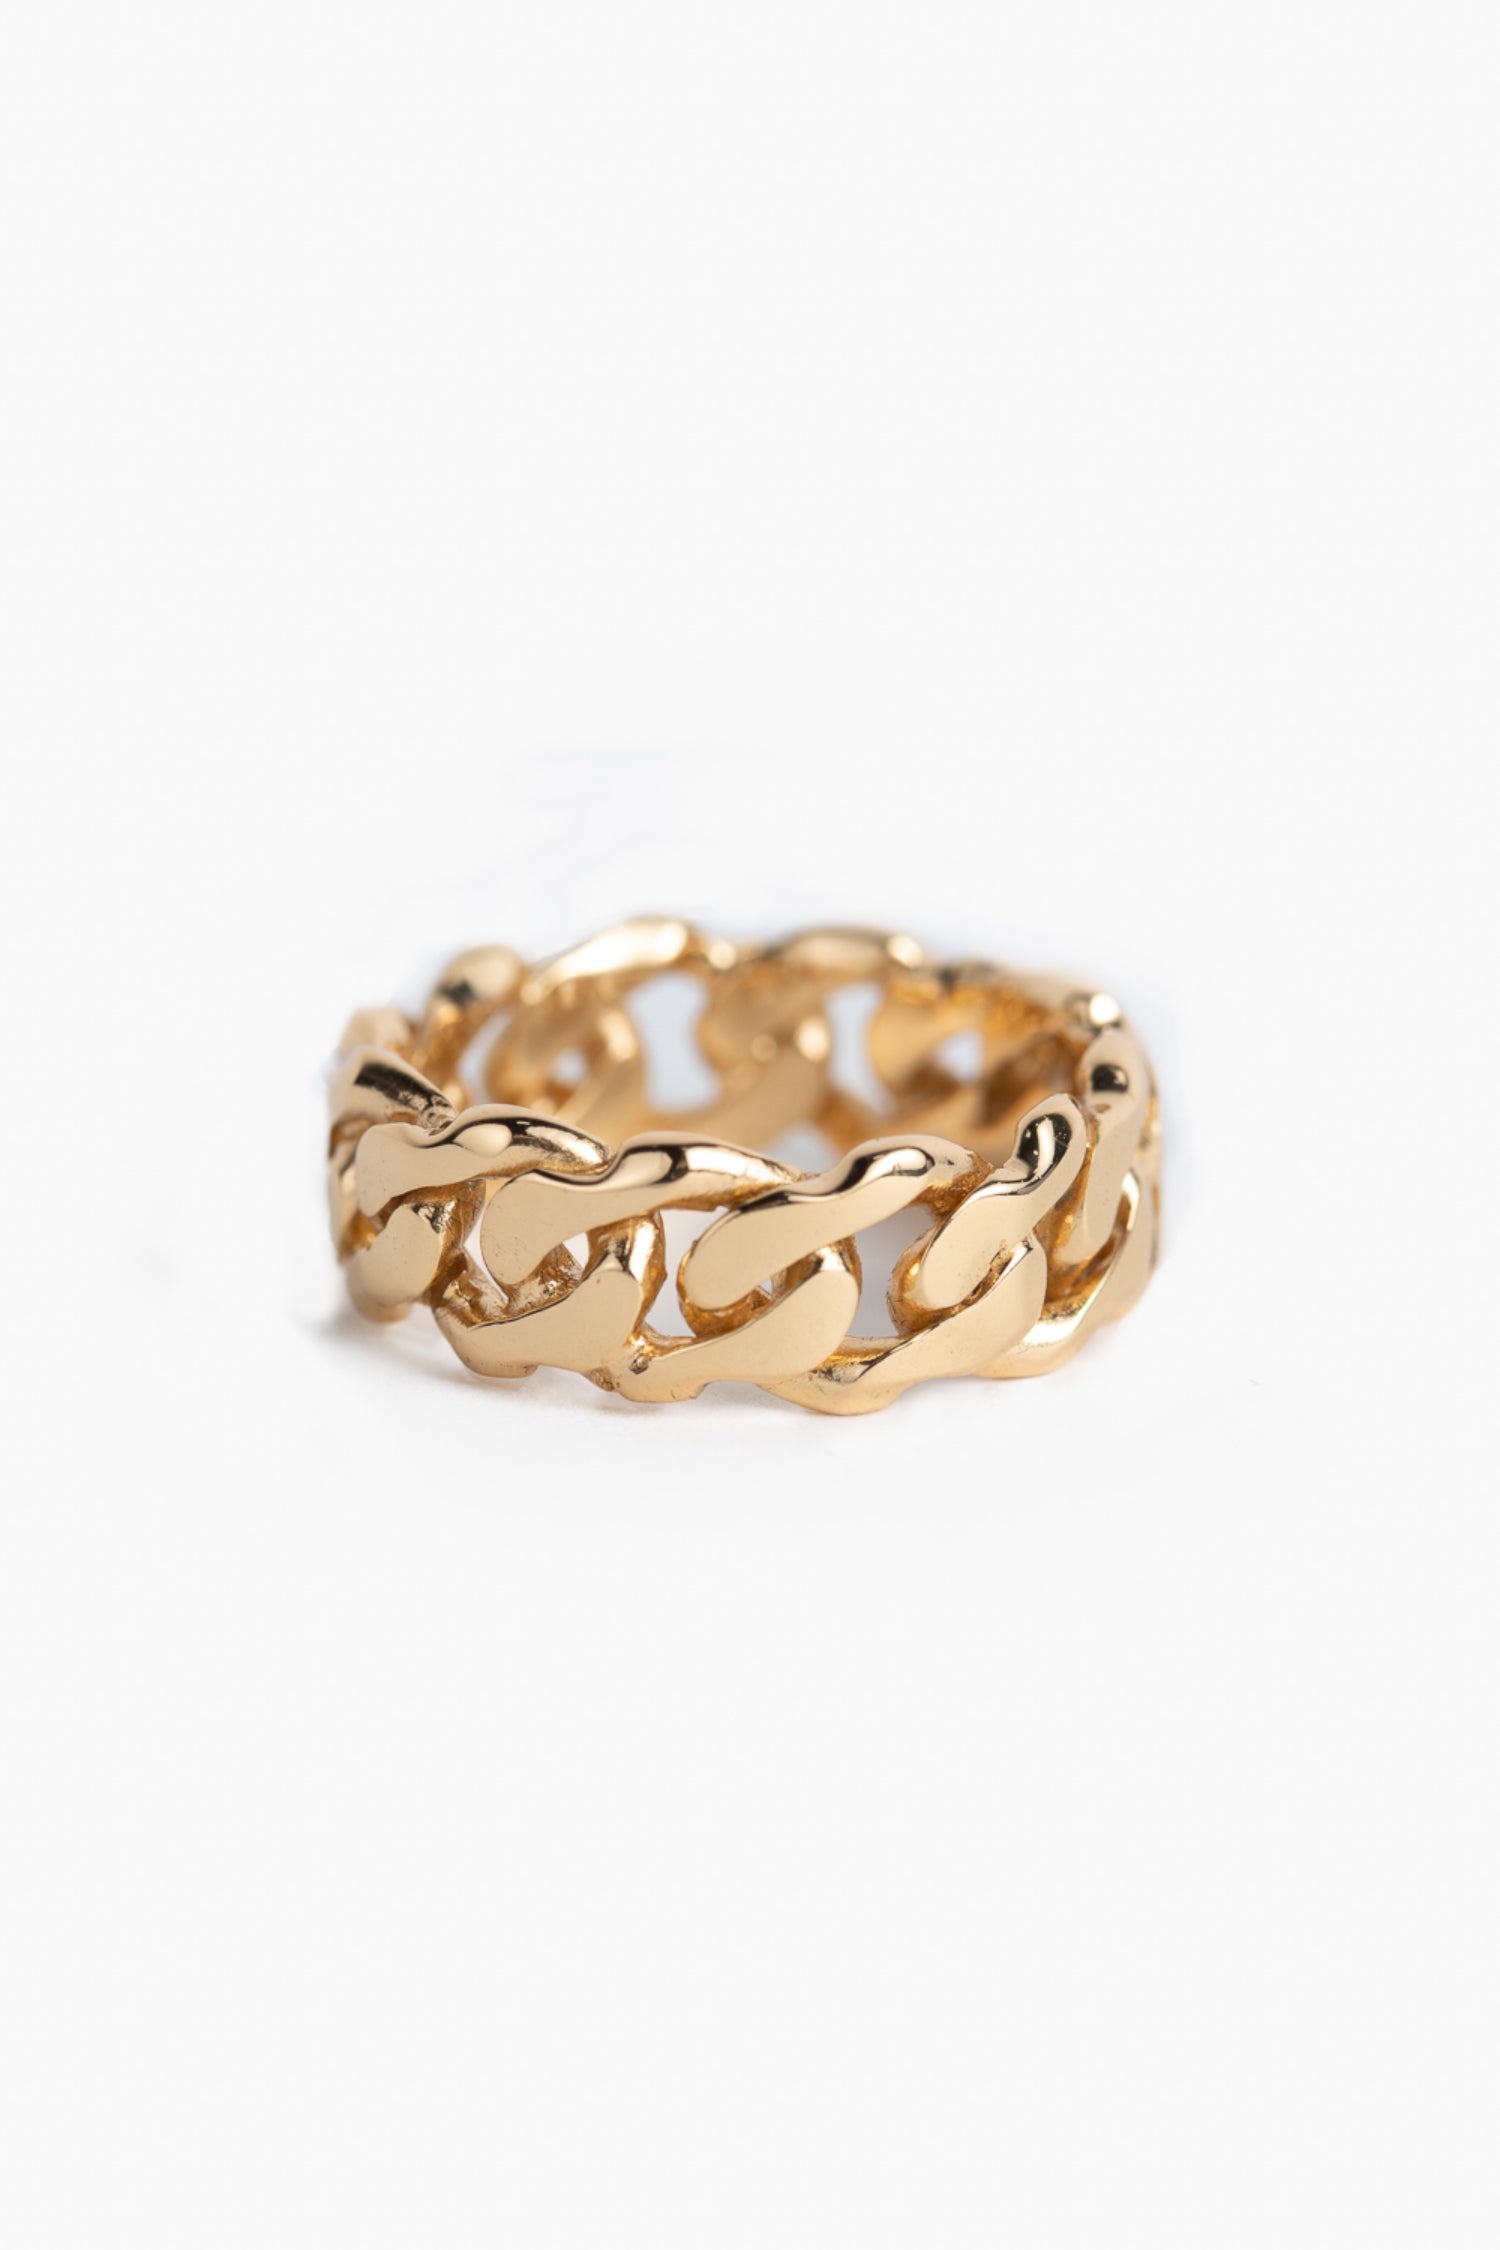 Carson Gold Stackable Ring Band - Waterproof Ring